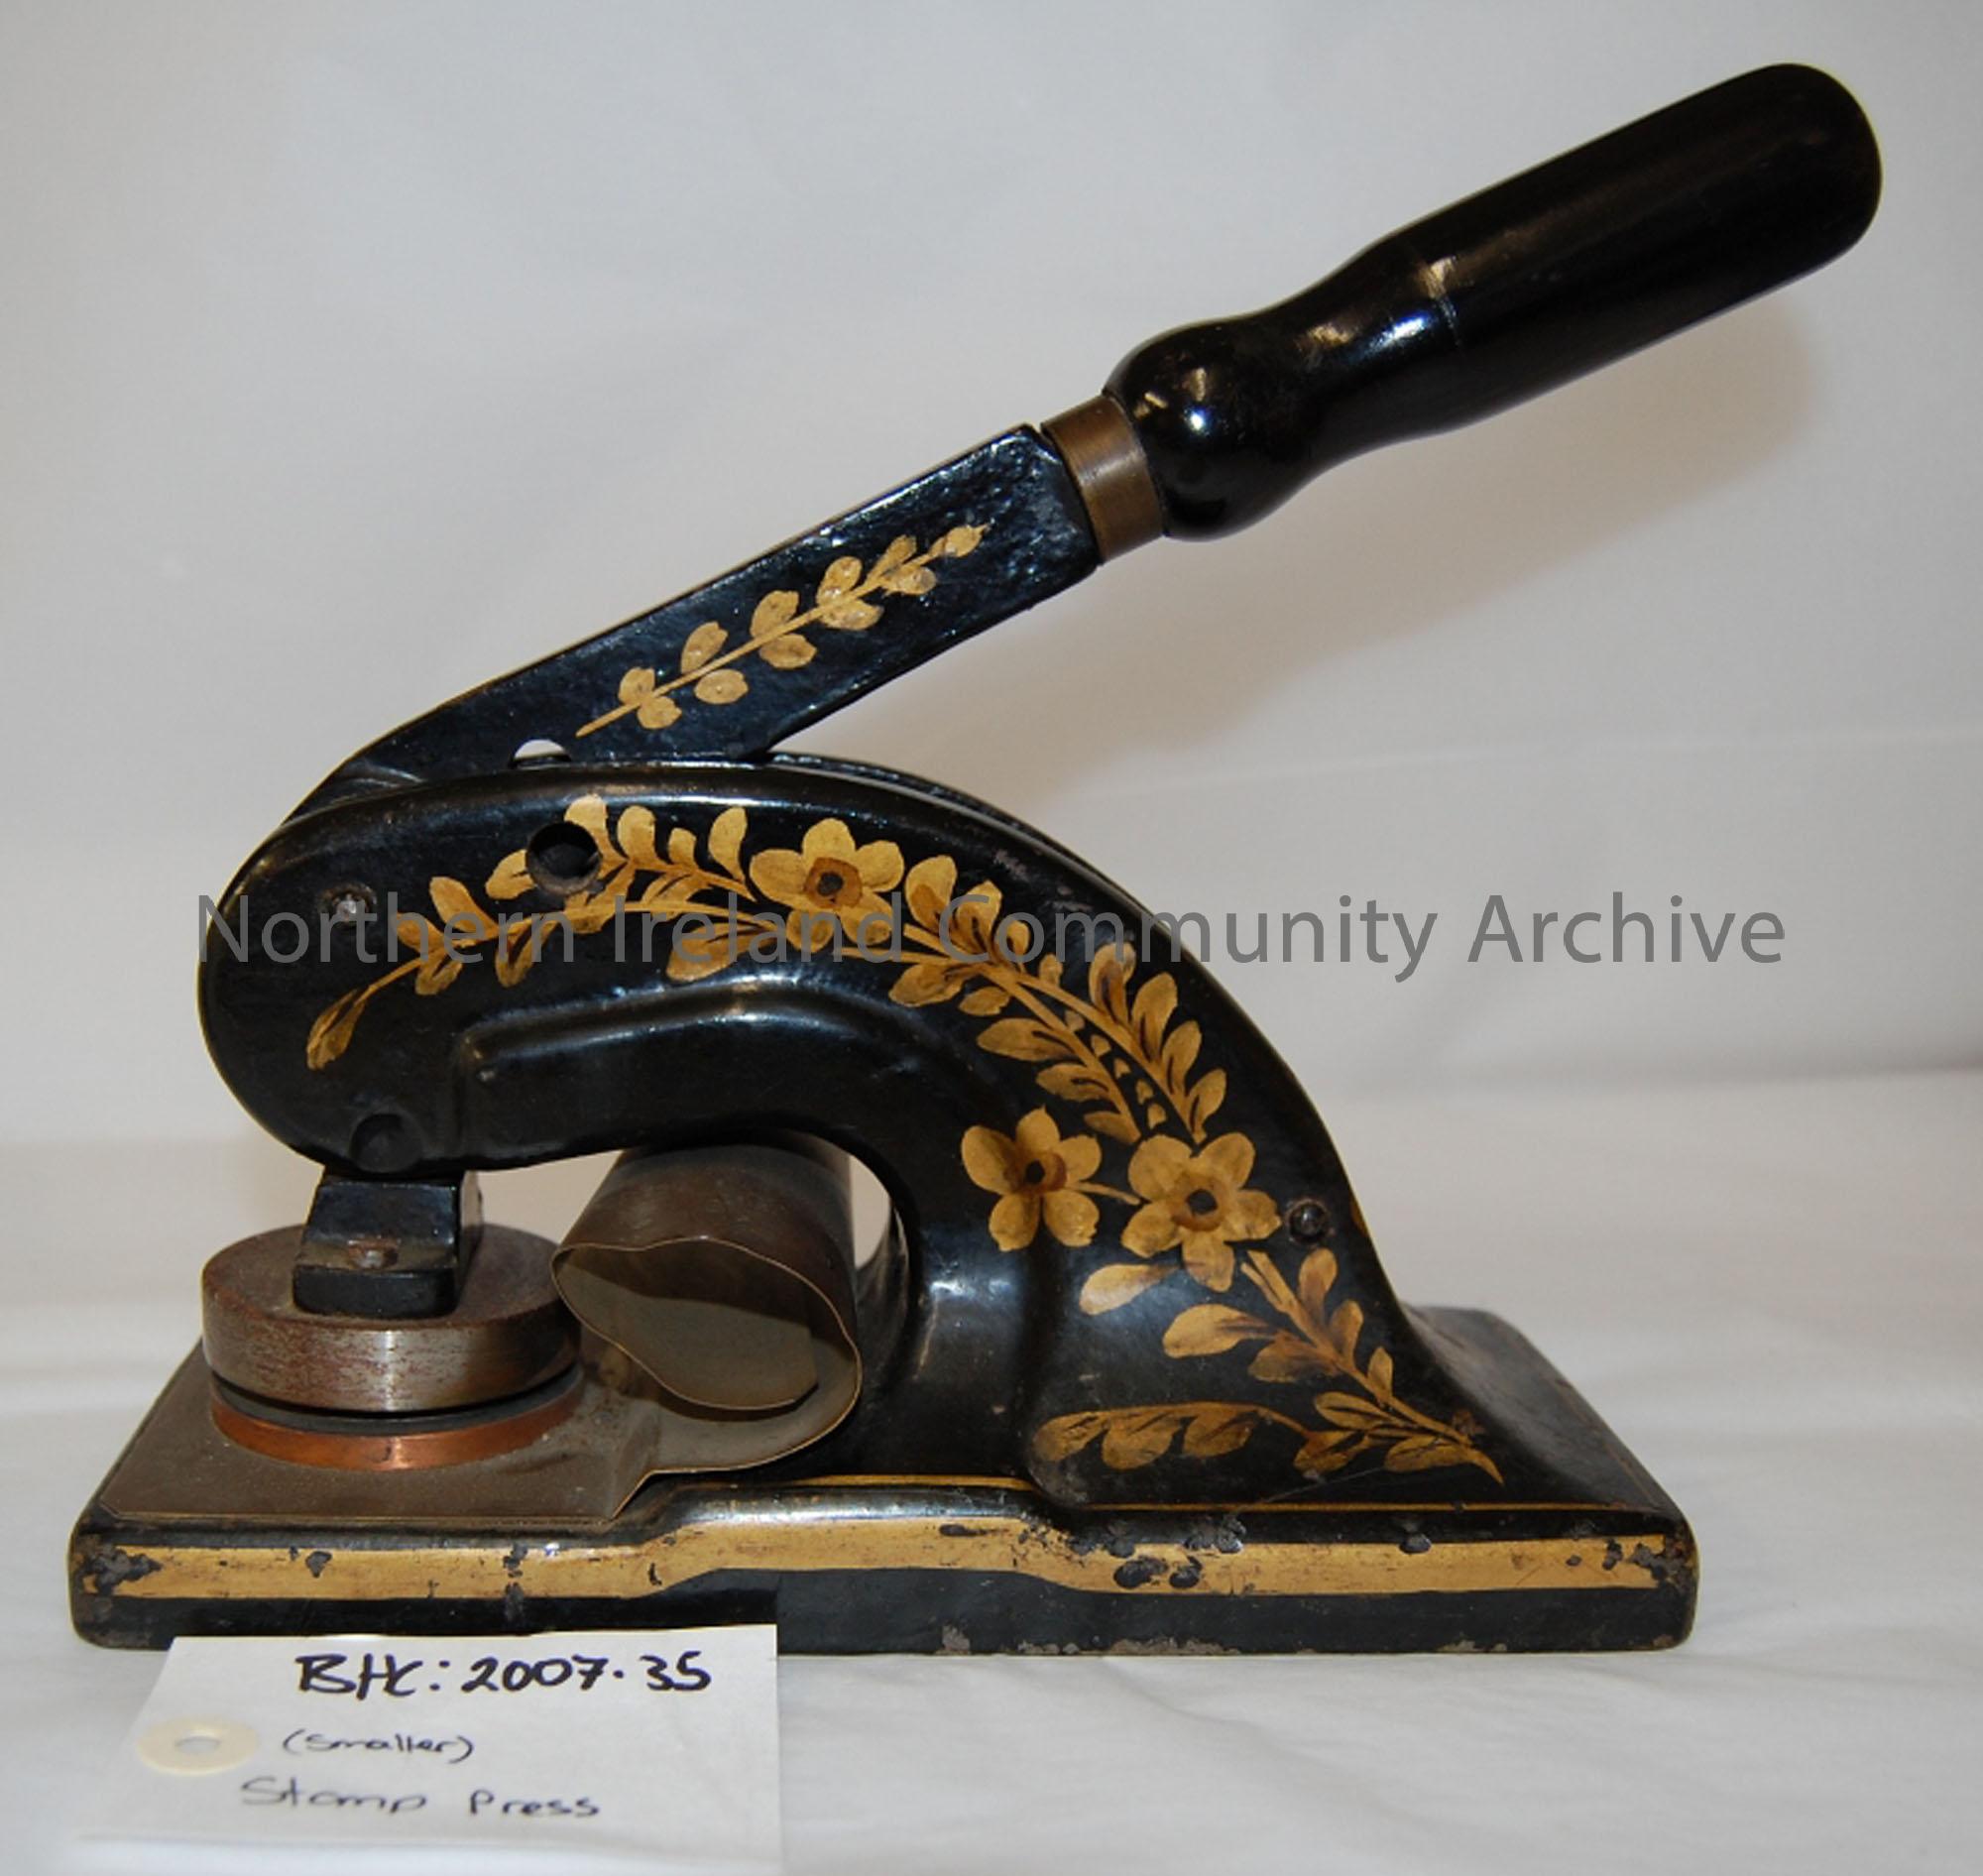 ‘Ballymoney Board of Guardians’ stamp press from Ballymoney Town Hall. Painted black with gold painted leaf/flower design. Black painted wooden handle…